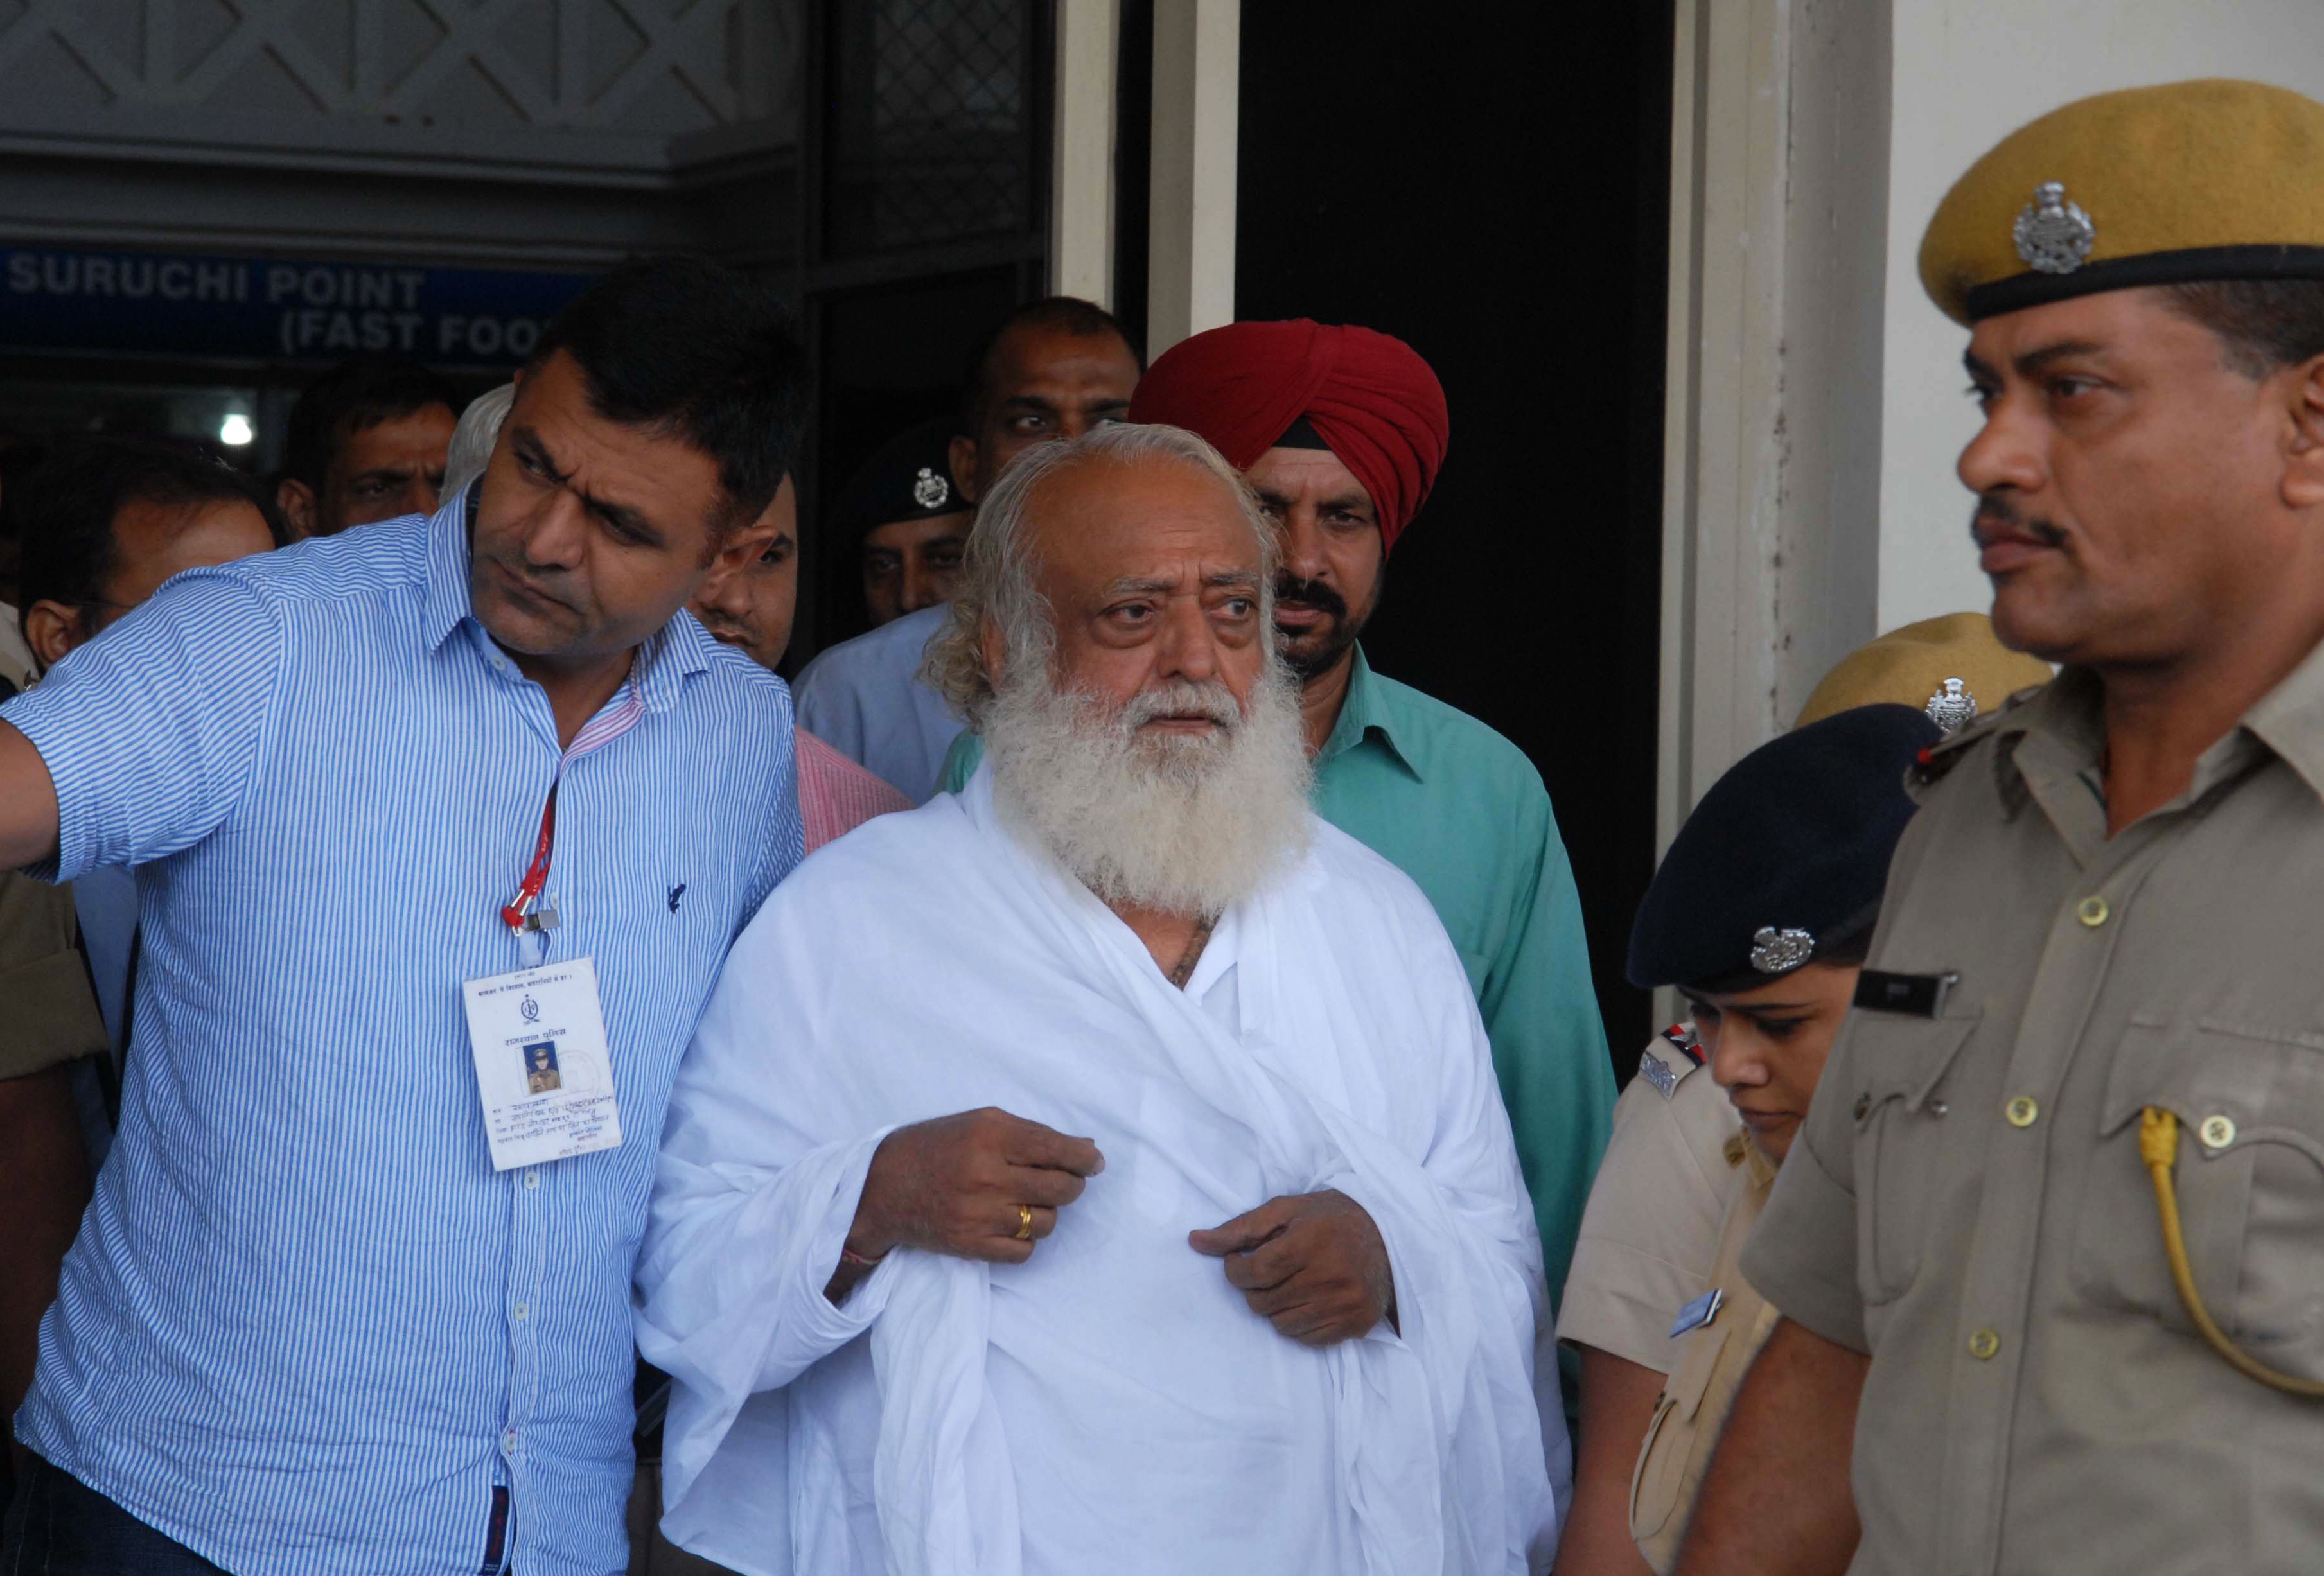 Holy man castrates self after India guru Asaram Bapu arrested for raping  16-year old | CNN